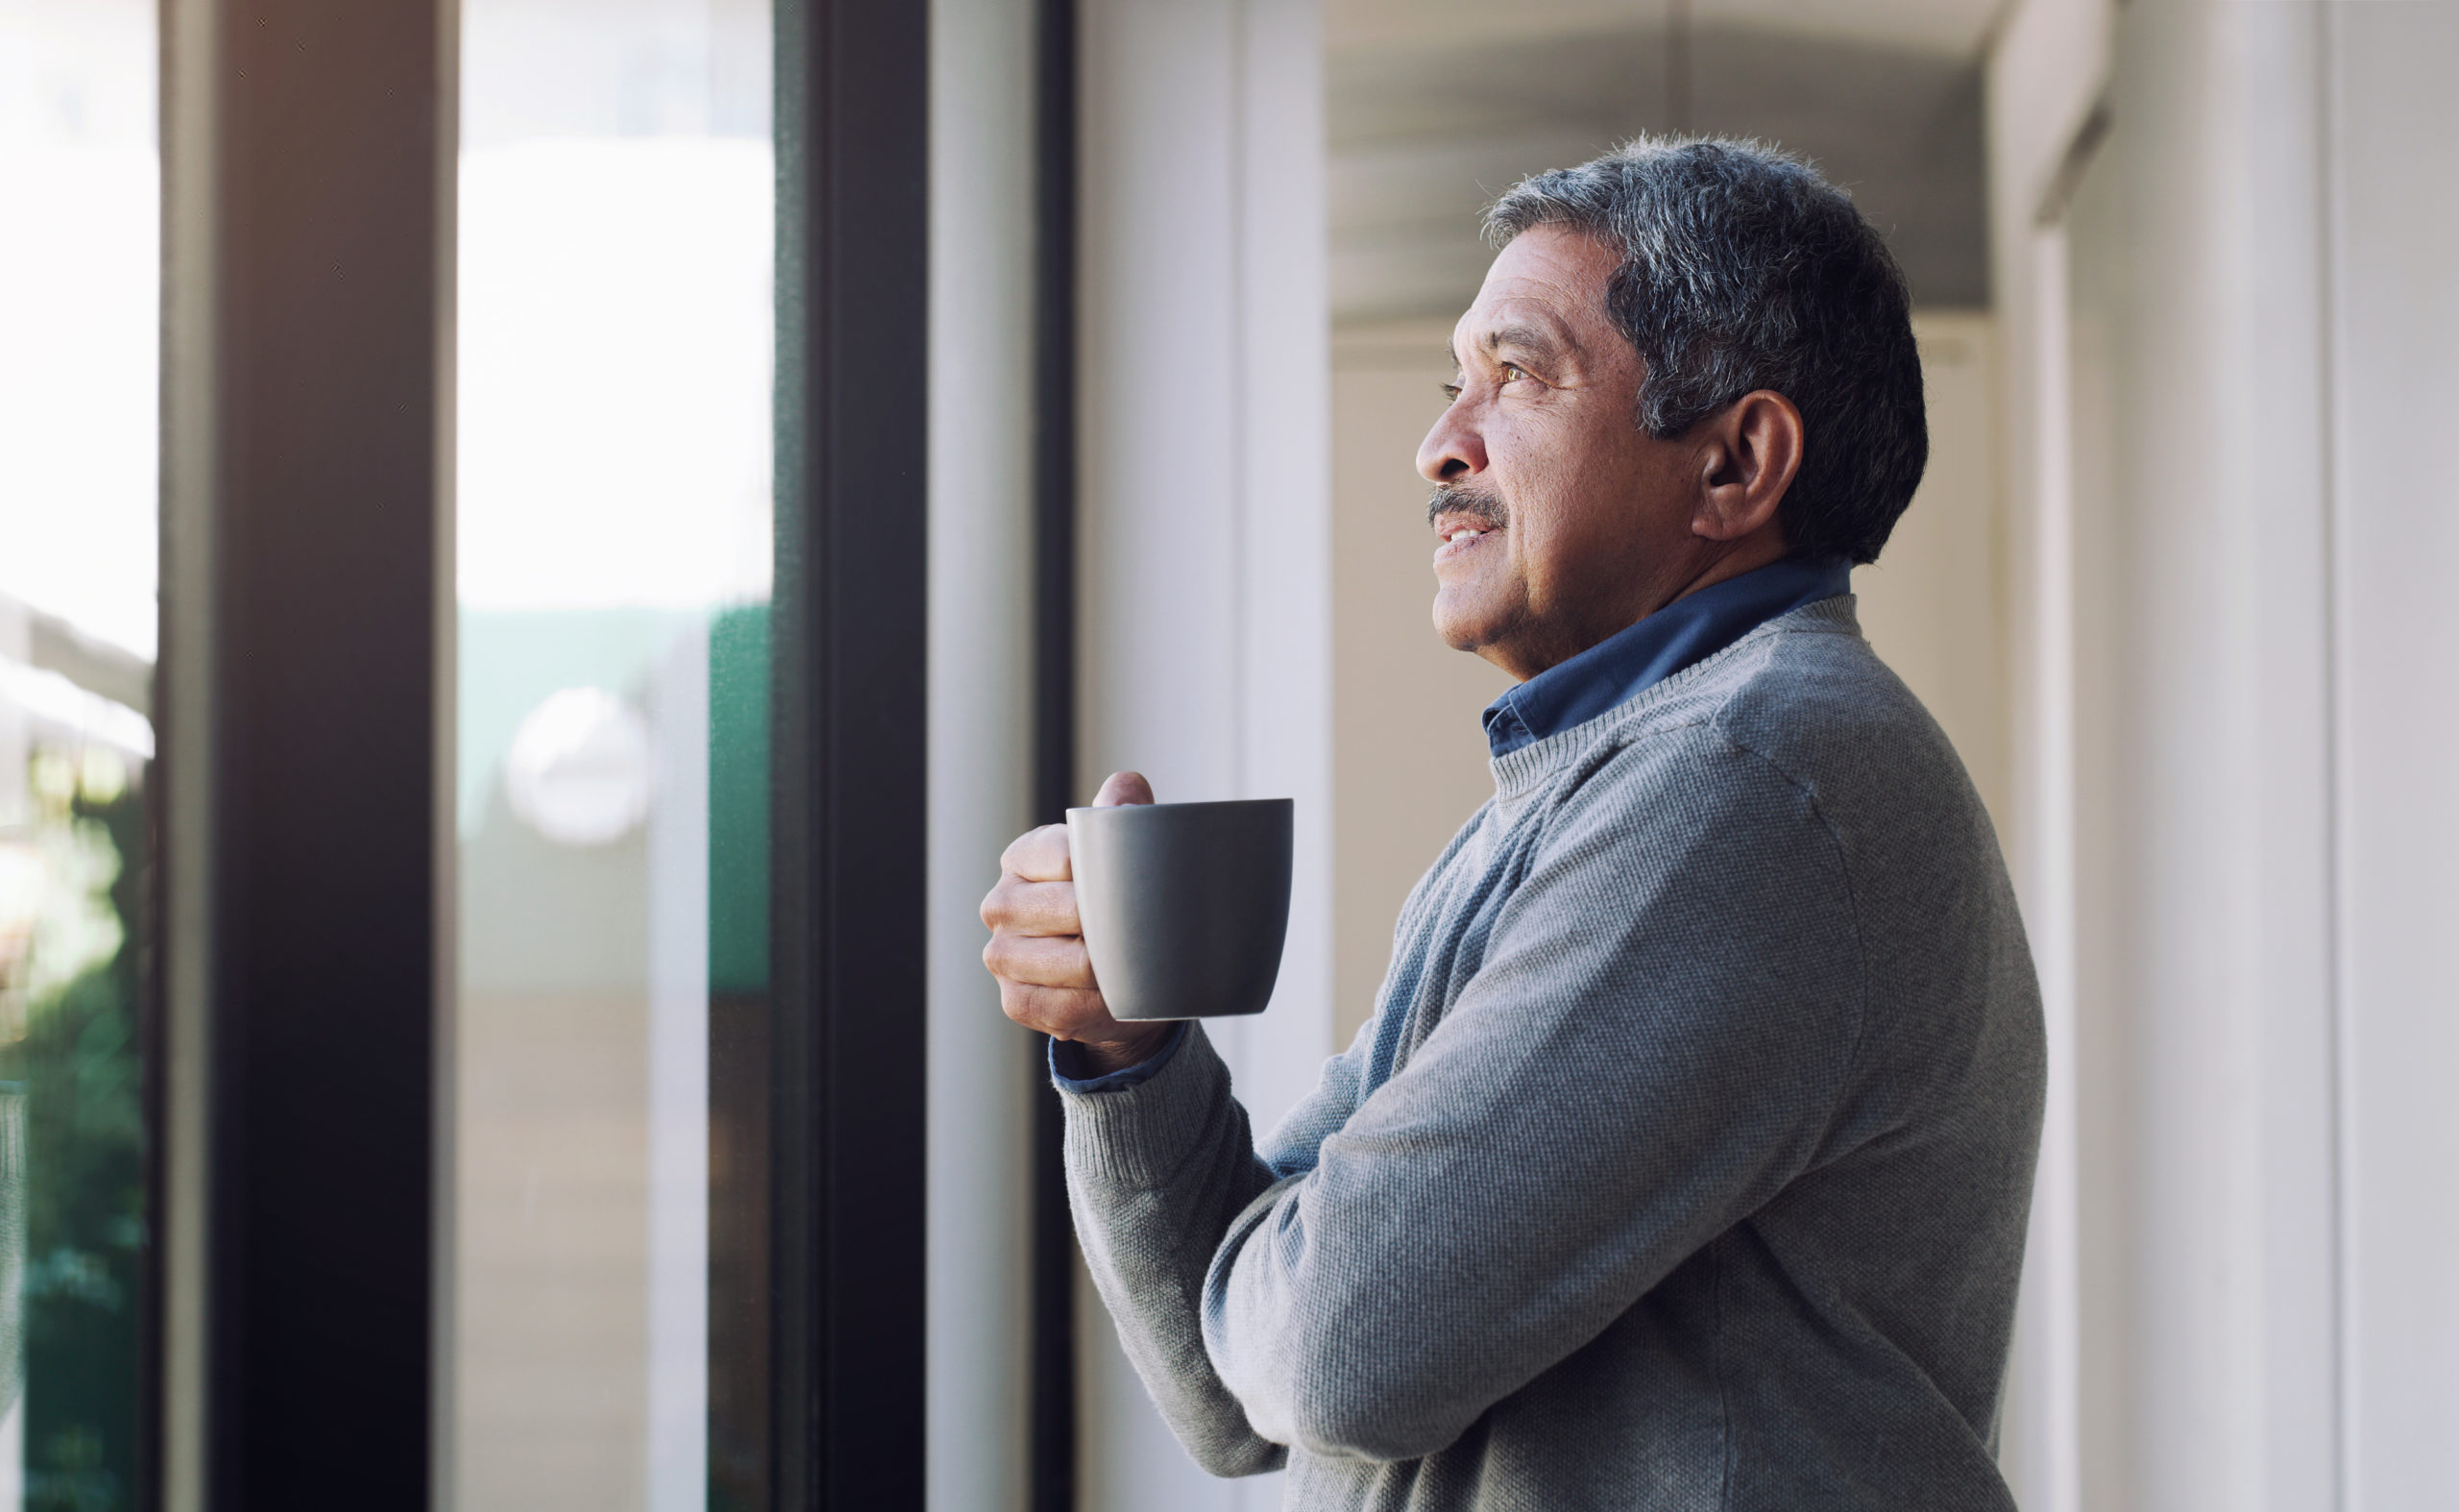 Shot of a man drinking a hot beverage and looking thoughtfully out of a window